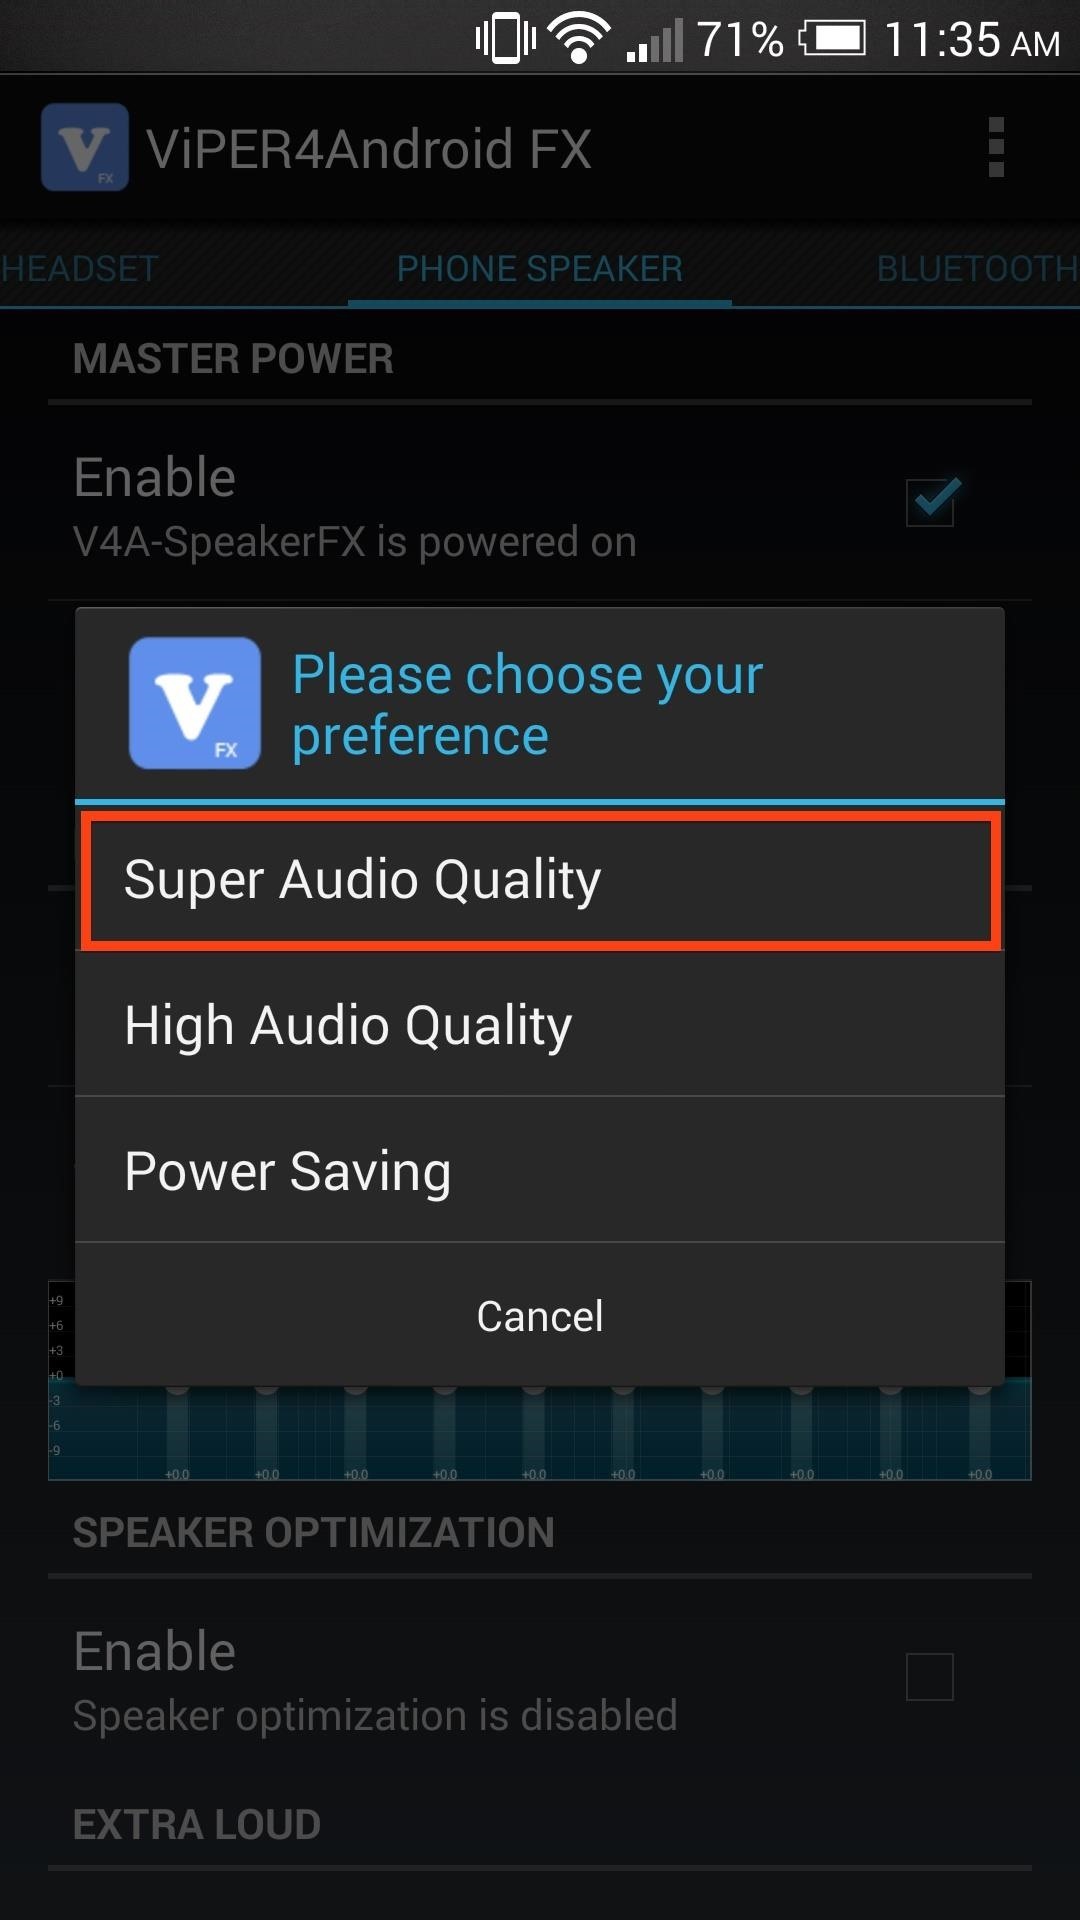 How to Get Even Better Sound Quality Out of Your HTC One's Speakers